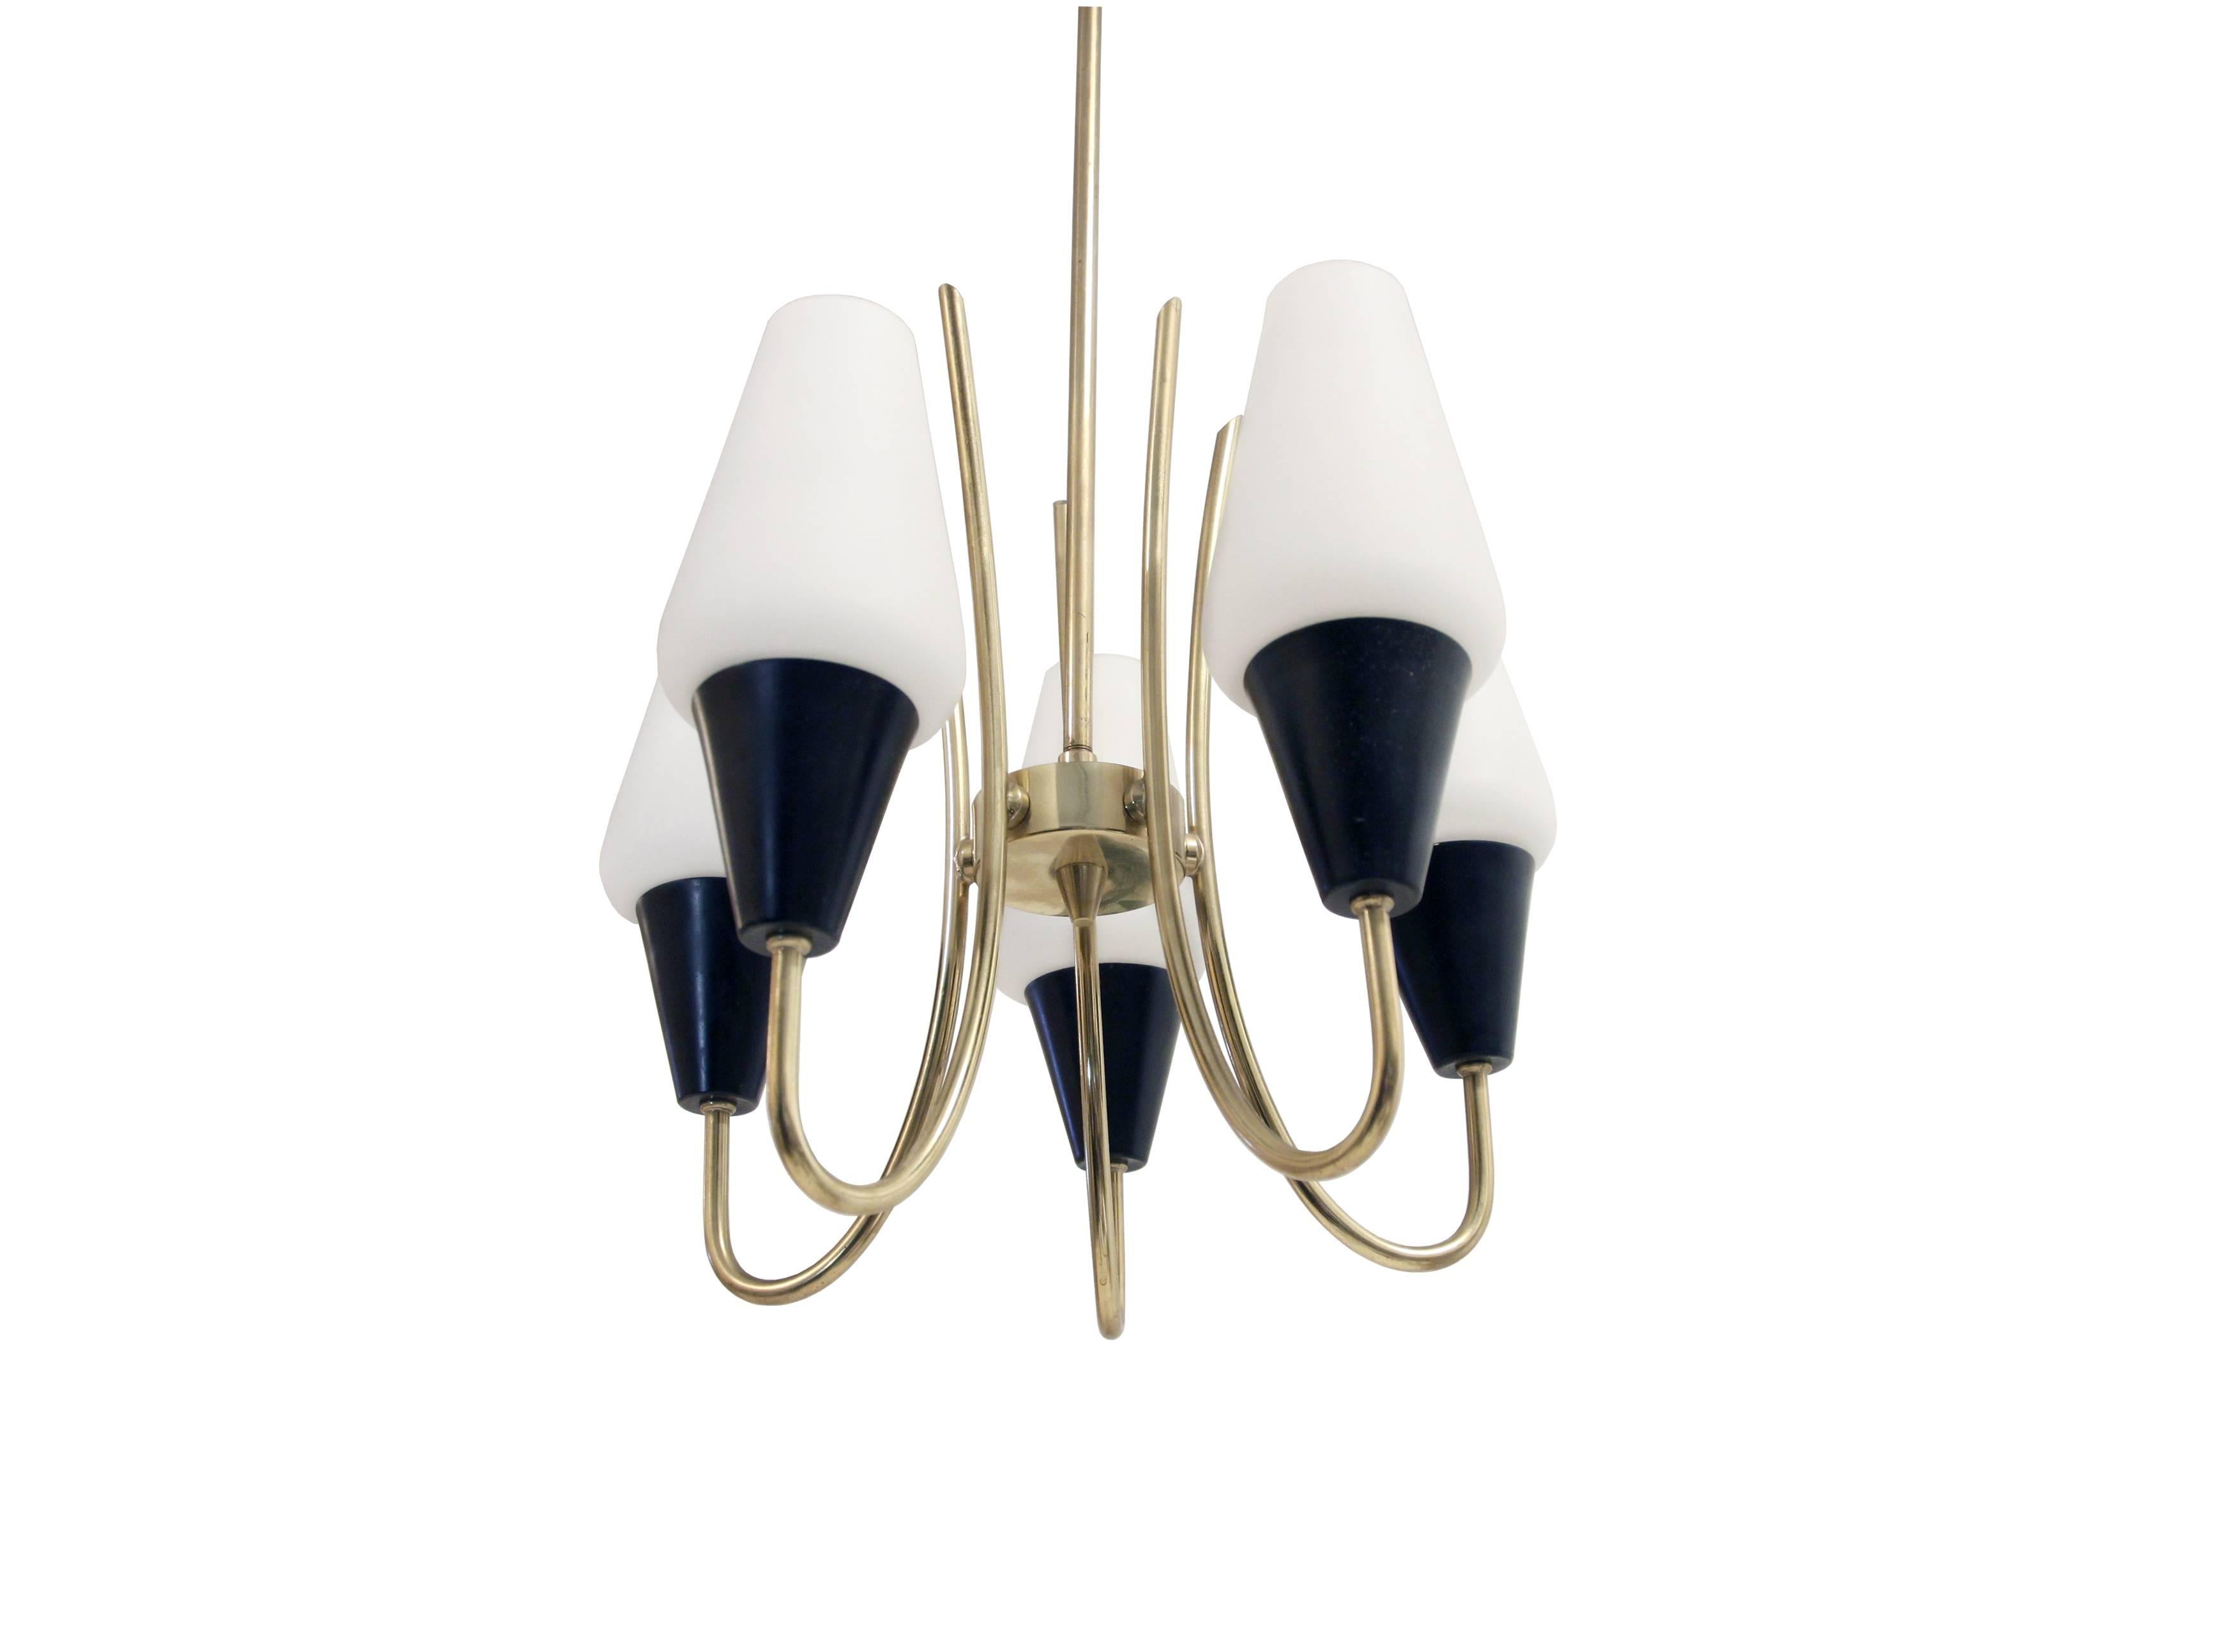 Wonderful and decorative five-armed chandelier in brass, steel and opaline glass. Designed by Jonas Hidle and made in Norway by Høvik Verk from circa 1960s first half. The lamp is fully working and excellent vintage condition.